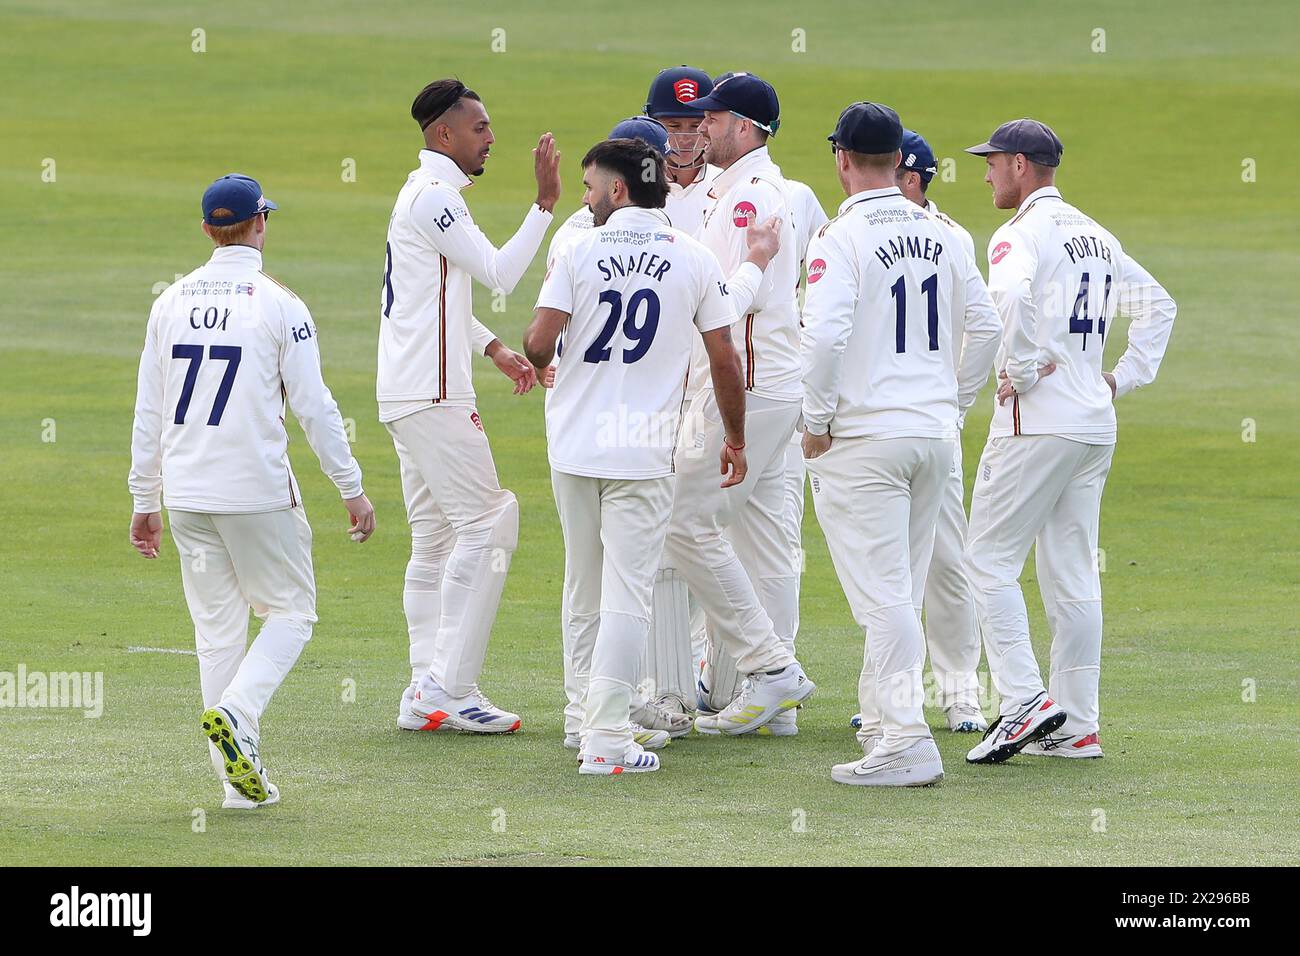 Shane Snater of Essex celebrates with his team mates after taking the wicket of Keaton Jennings during Essex CCC vs Lancashire CCC, Vitality County Ch Stock Photo